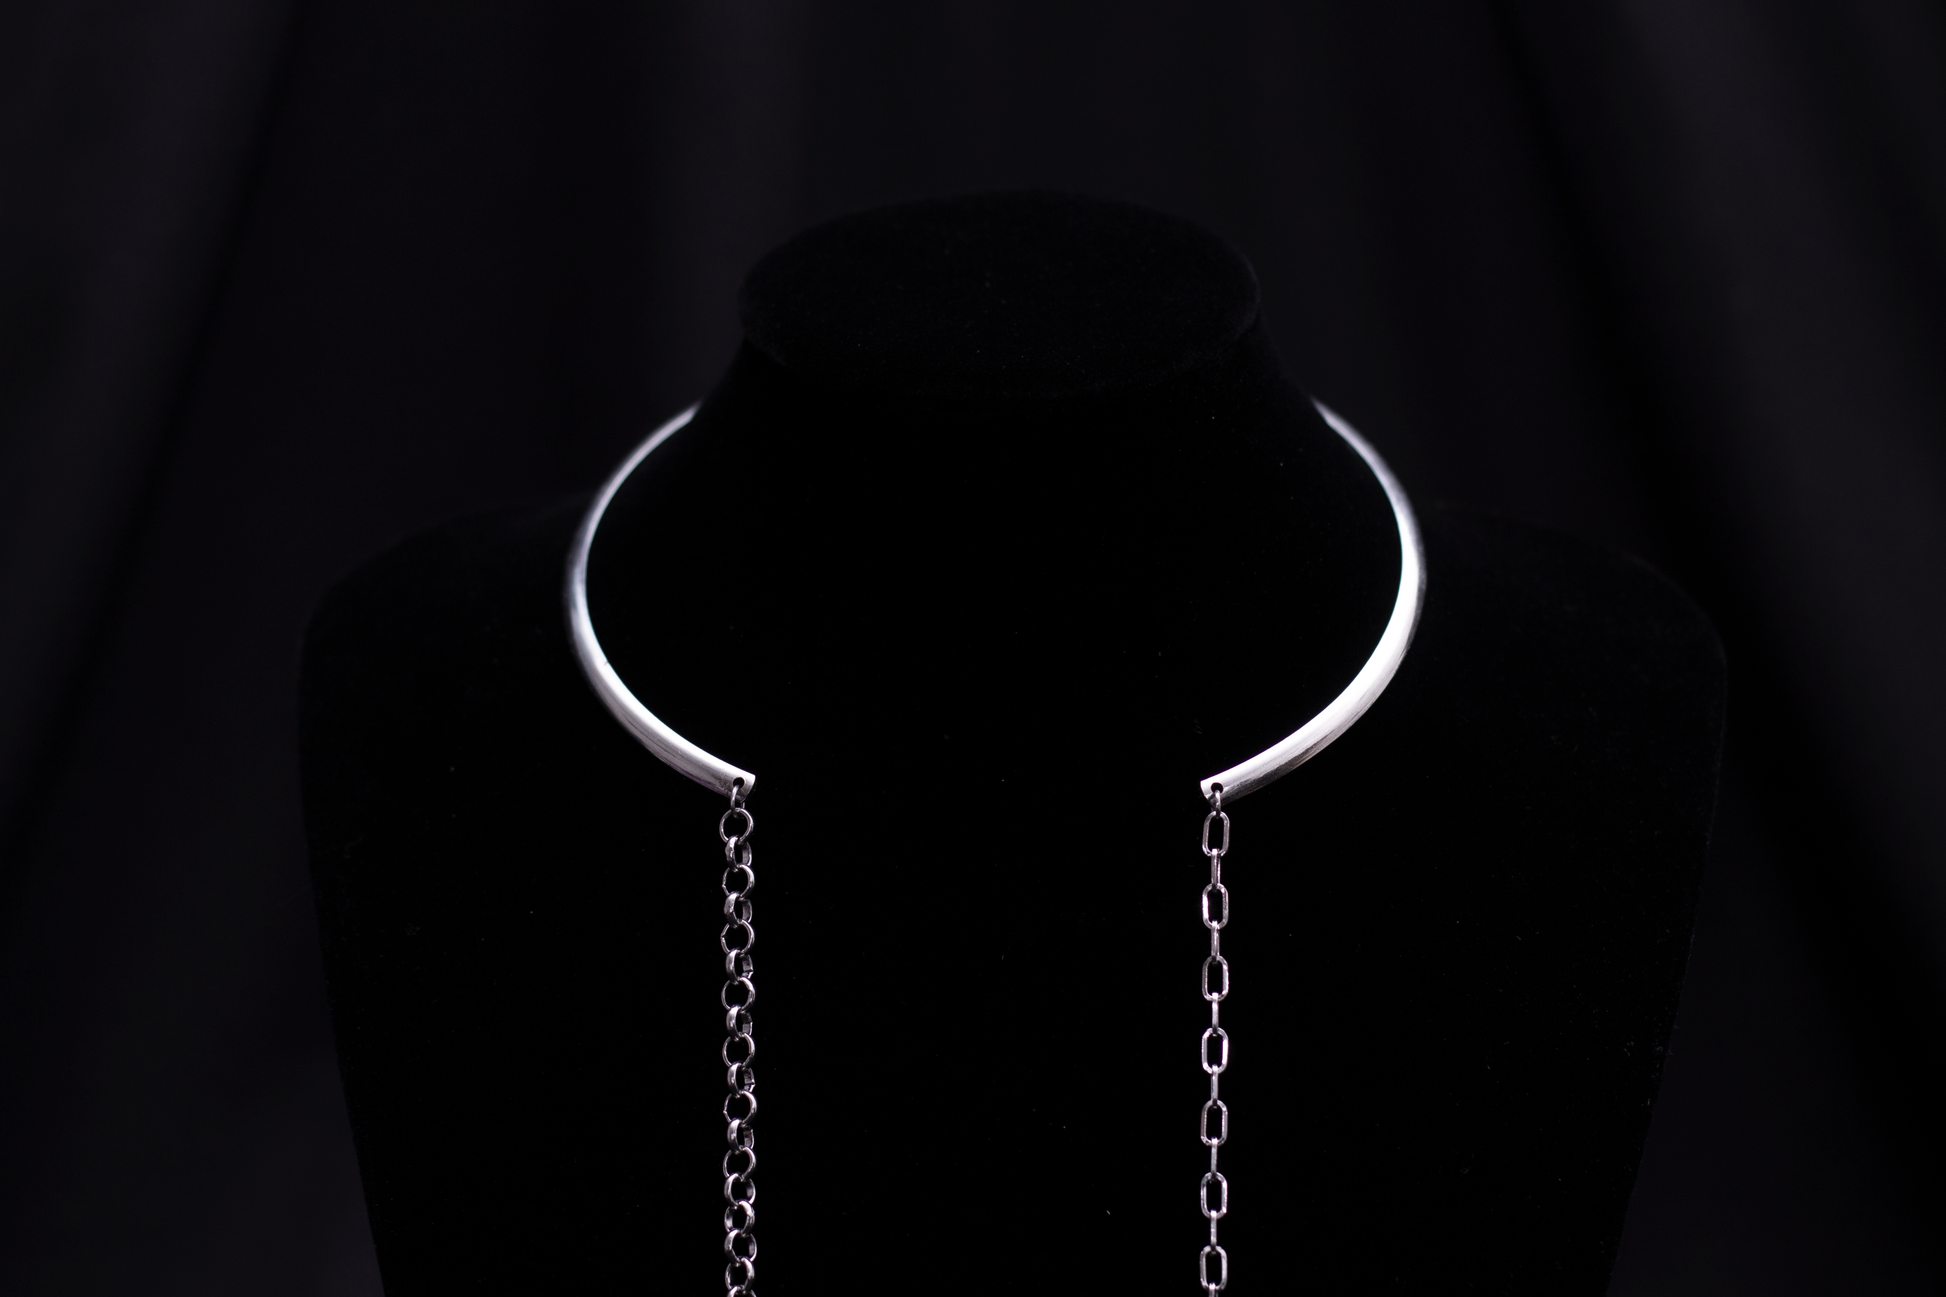 Displayed on a black mannequin, a Myril Jewels rigid minimal necklace with two long hanging chains creates a stark, elegant silhouette. This piece is emblematic of the brand's dark-avantgarde aesthetic, suited for gothic, whimsigoth, and minimal goth styles, making it a versatile accessory for everyday wear or special events like festivals.